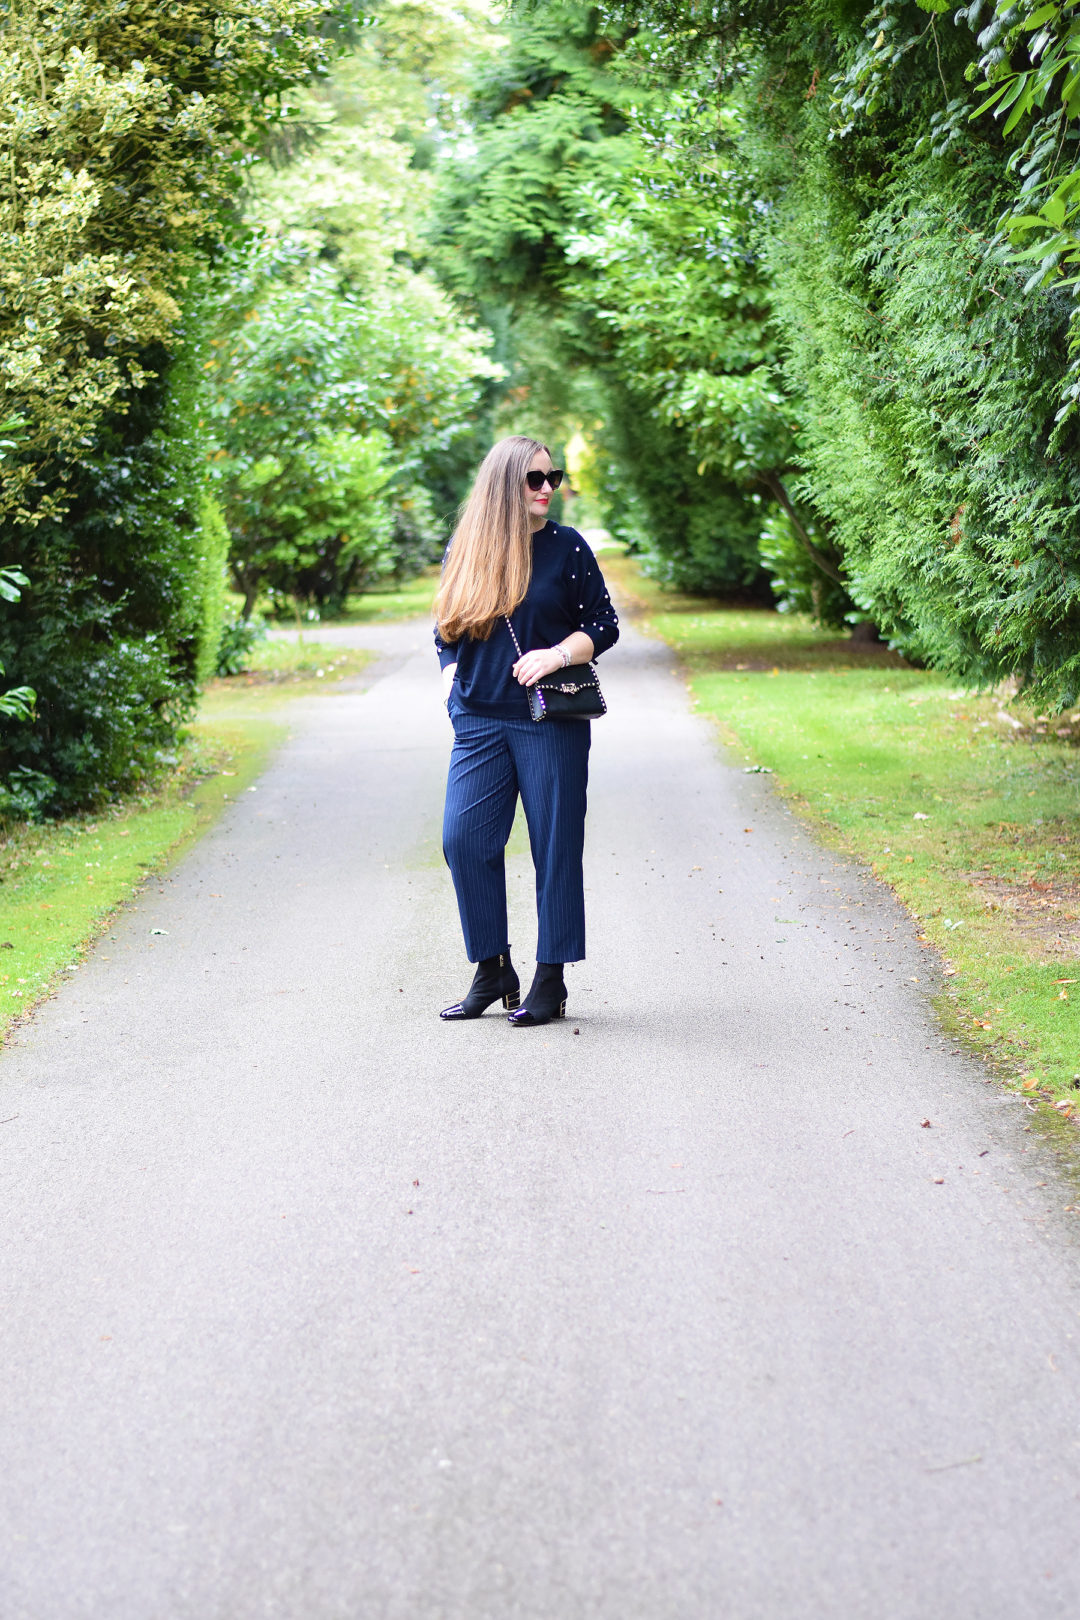 Gemma from Jacquard Flower British fashion blog wearing navy and black outfit